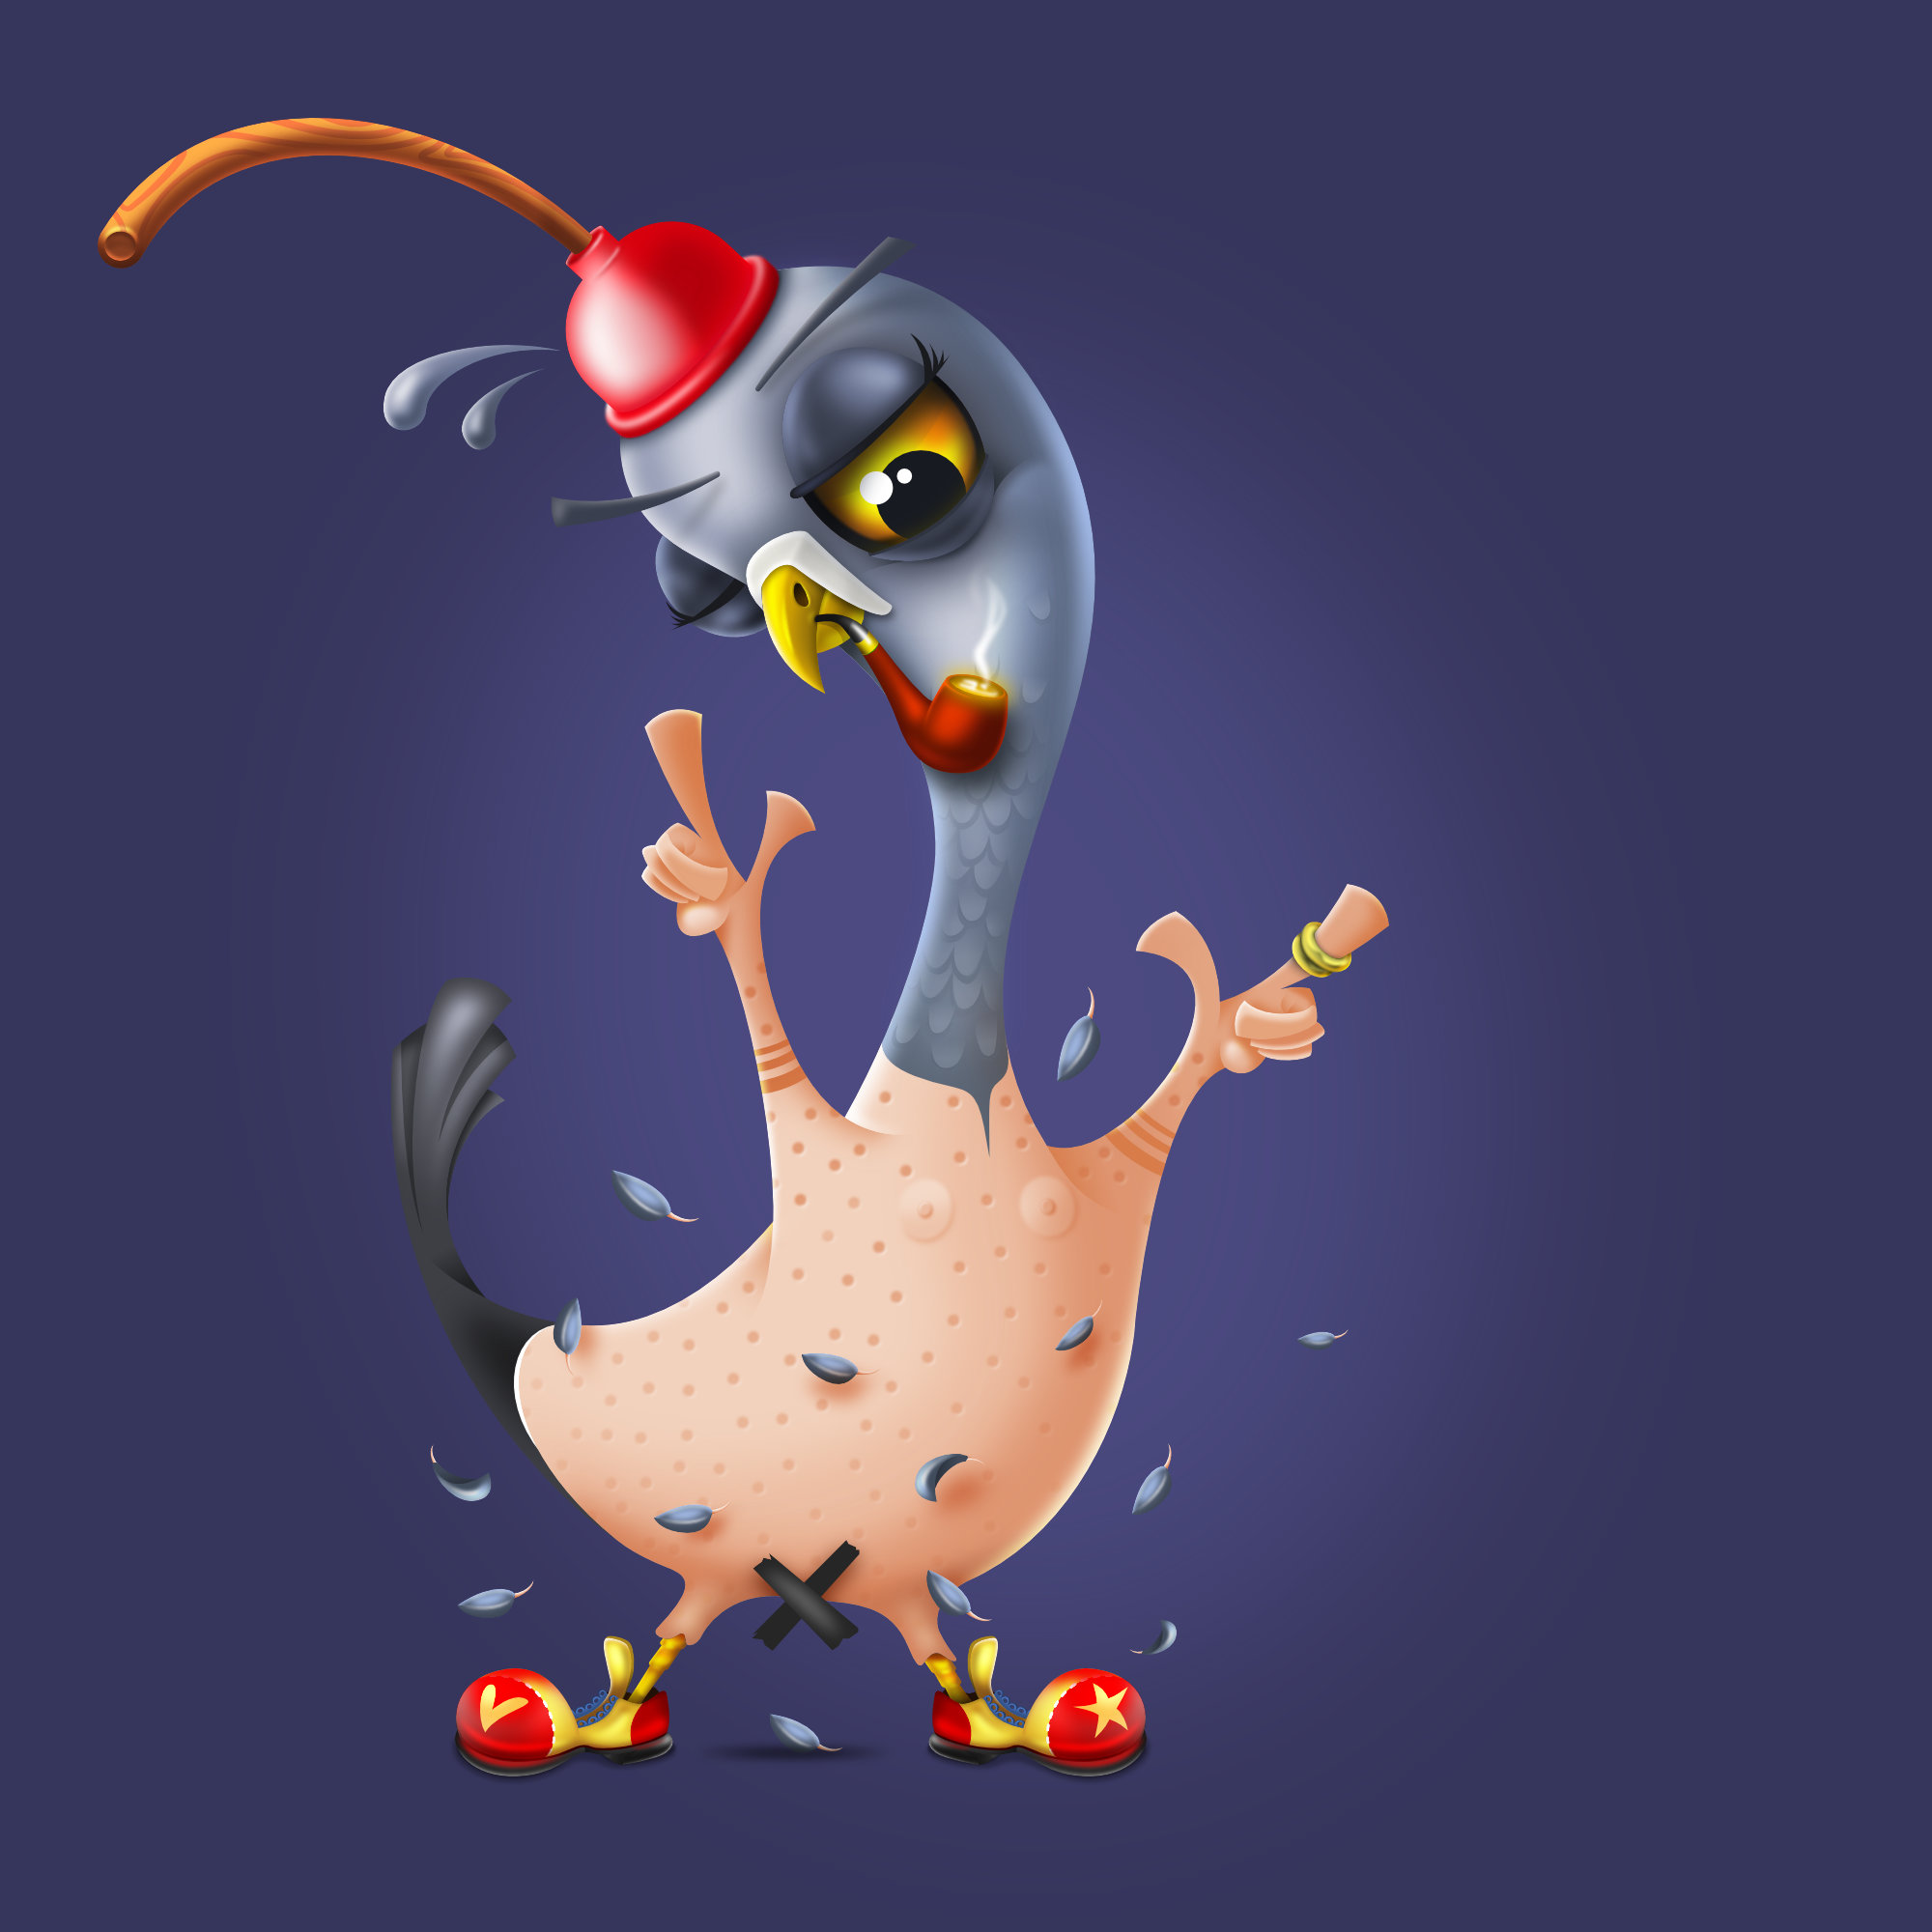 Naked Pigeon with clown shoes and a rubber toilet plunger